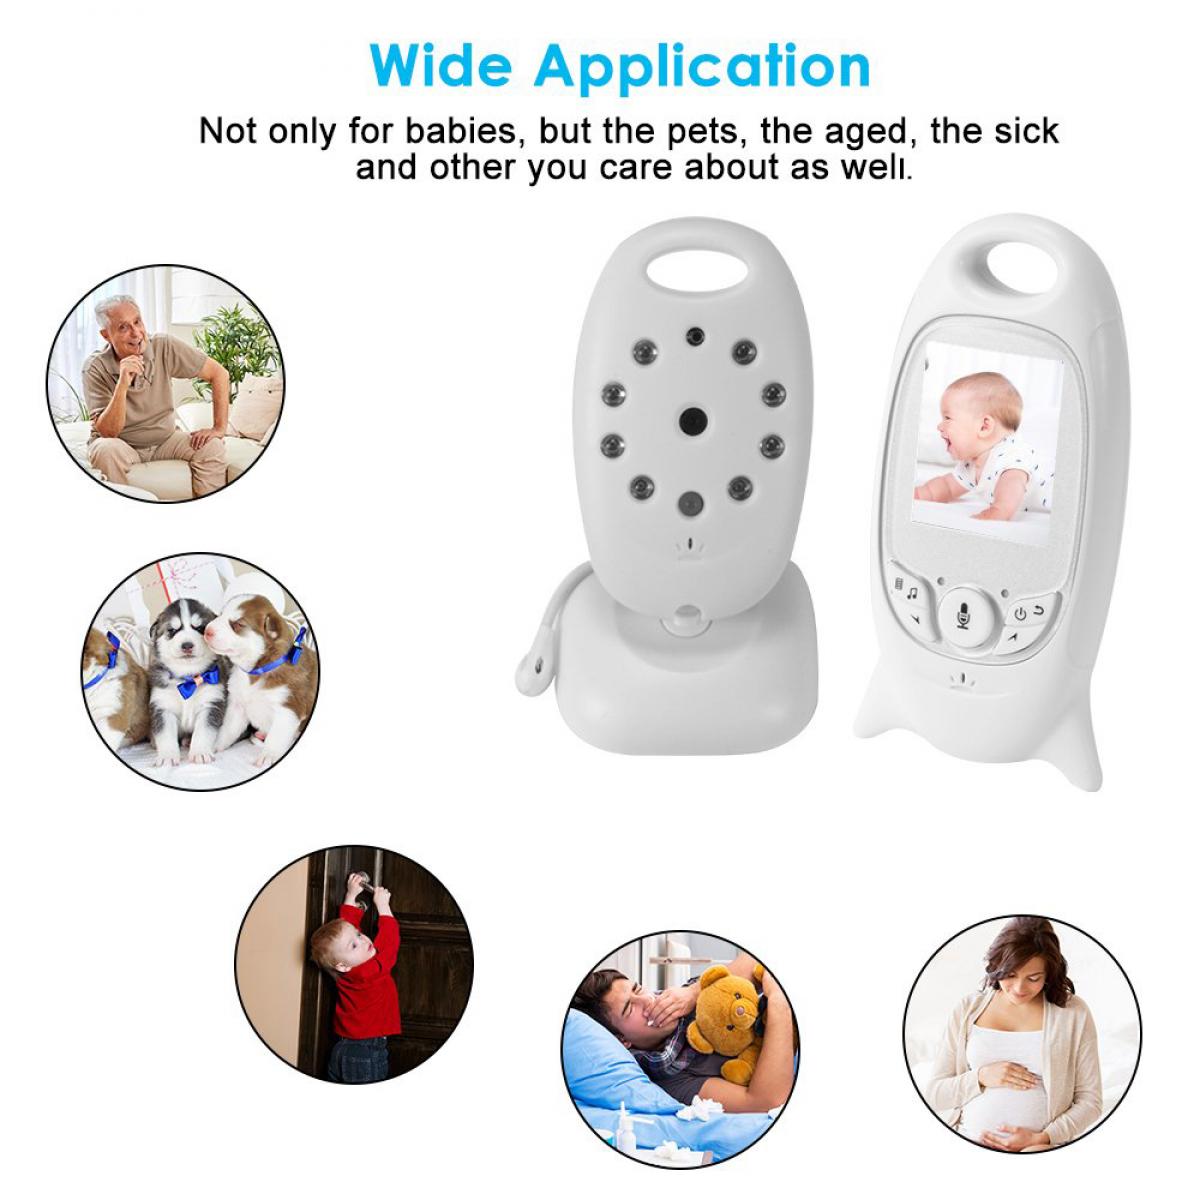 No WiFi Needed Video Baby Monitor Wireless Camera+2 Way Talk Back Audio+Night Vision+Temperature Sensor+8 Lullaby+2 LCD Screen+Baby Pet Surveillance Video Monitor Nanny Cam for Home Security System 